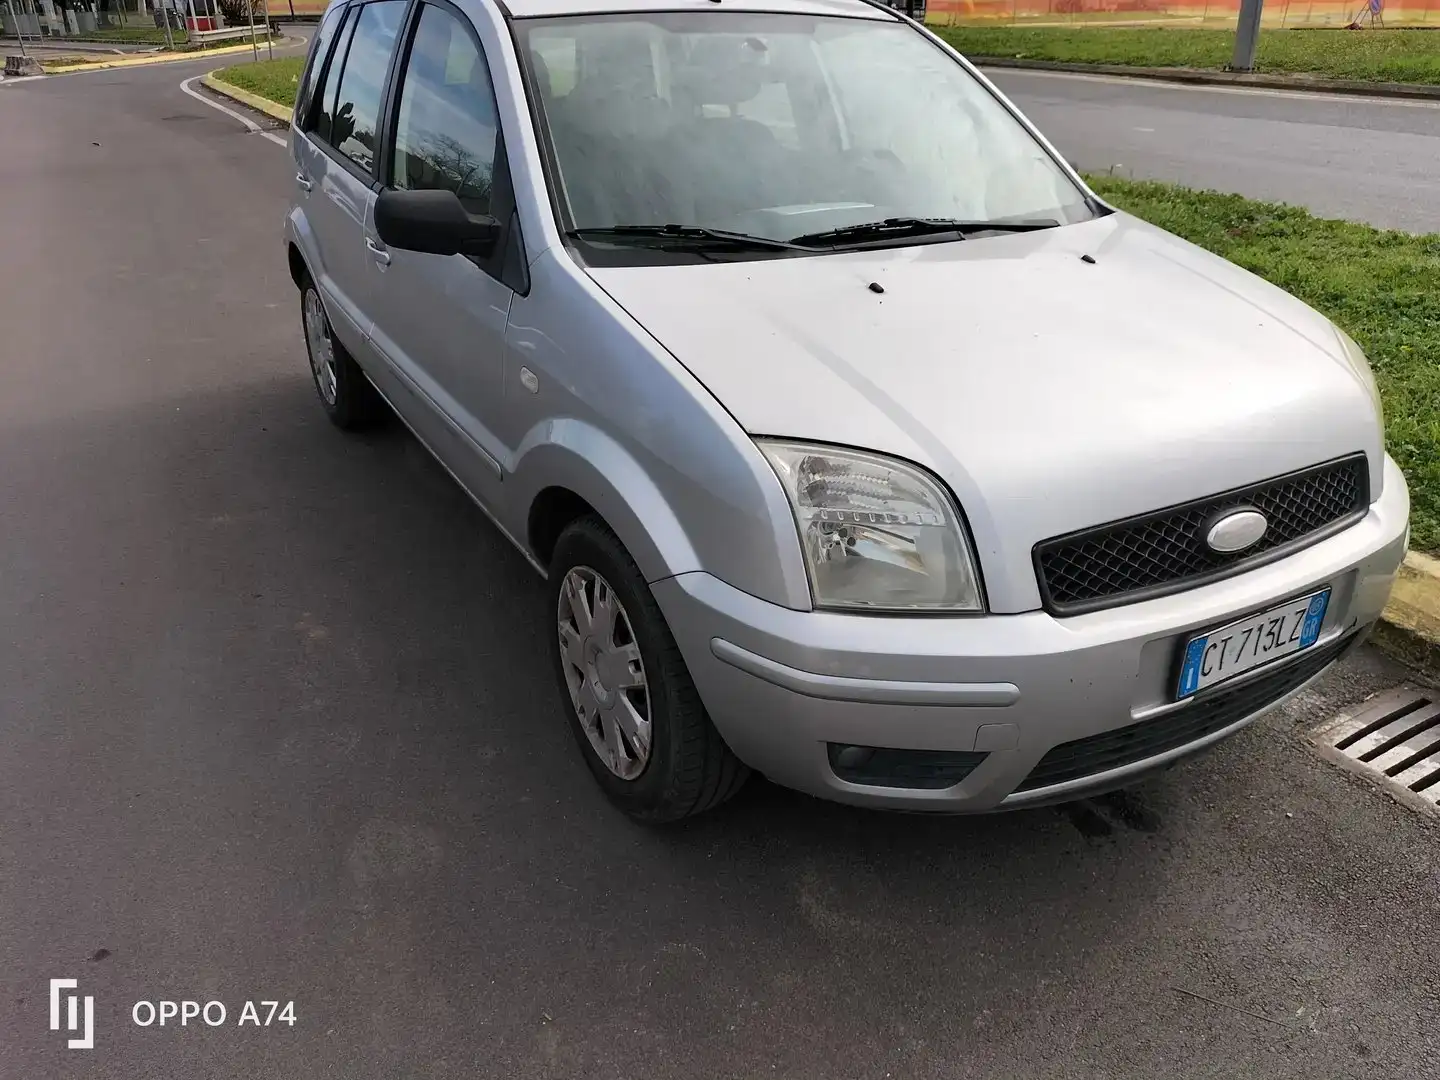 Ford Fusion Fusion I 2002 1.4 tdci Leather (collection) - 1